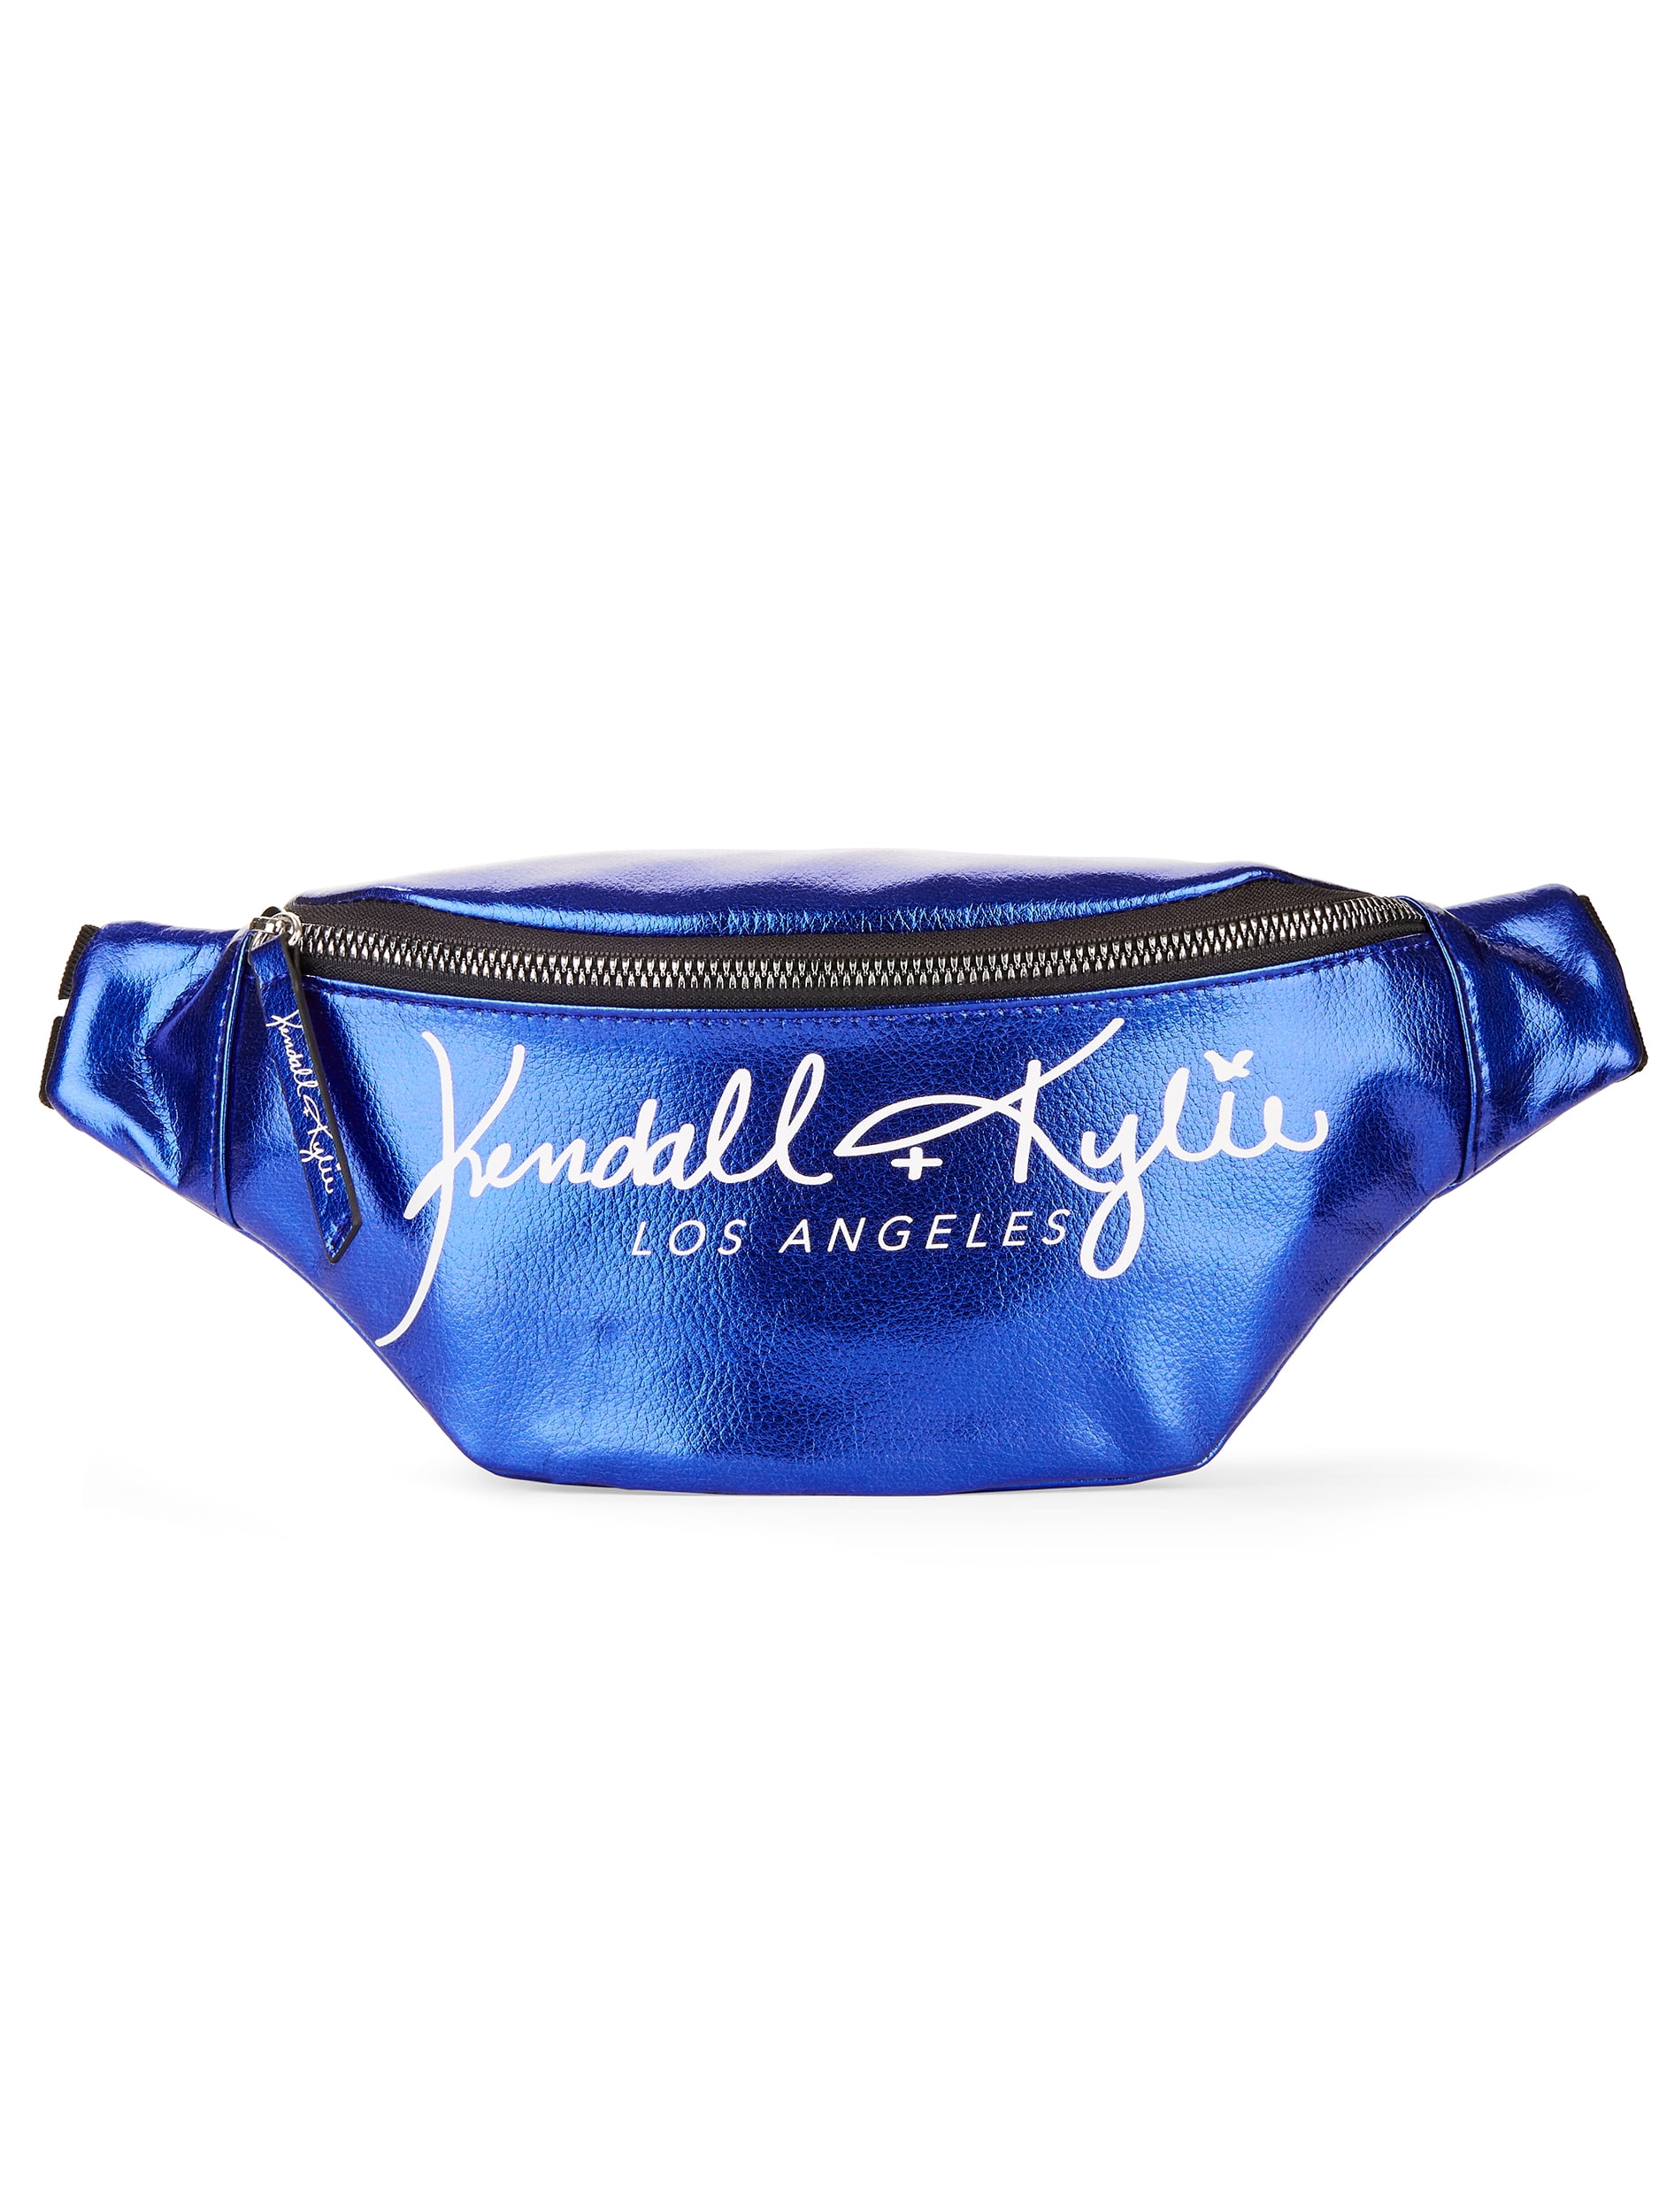 Kendall & Kylie Bags | Nwt Kendall and Kylie Fanny Pack | Color: Blue | Size: Os | Abigail_Kearns's Closet